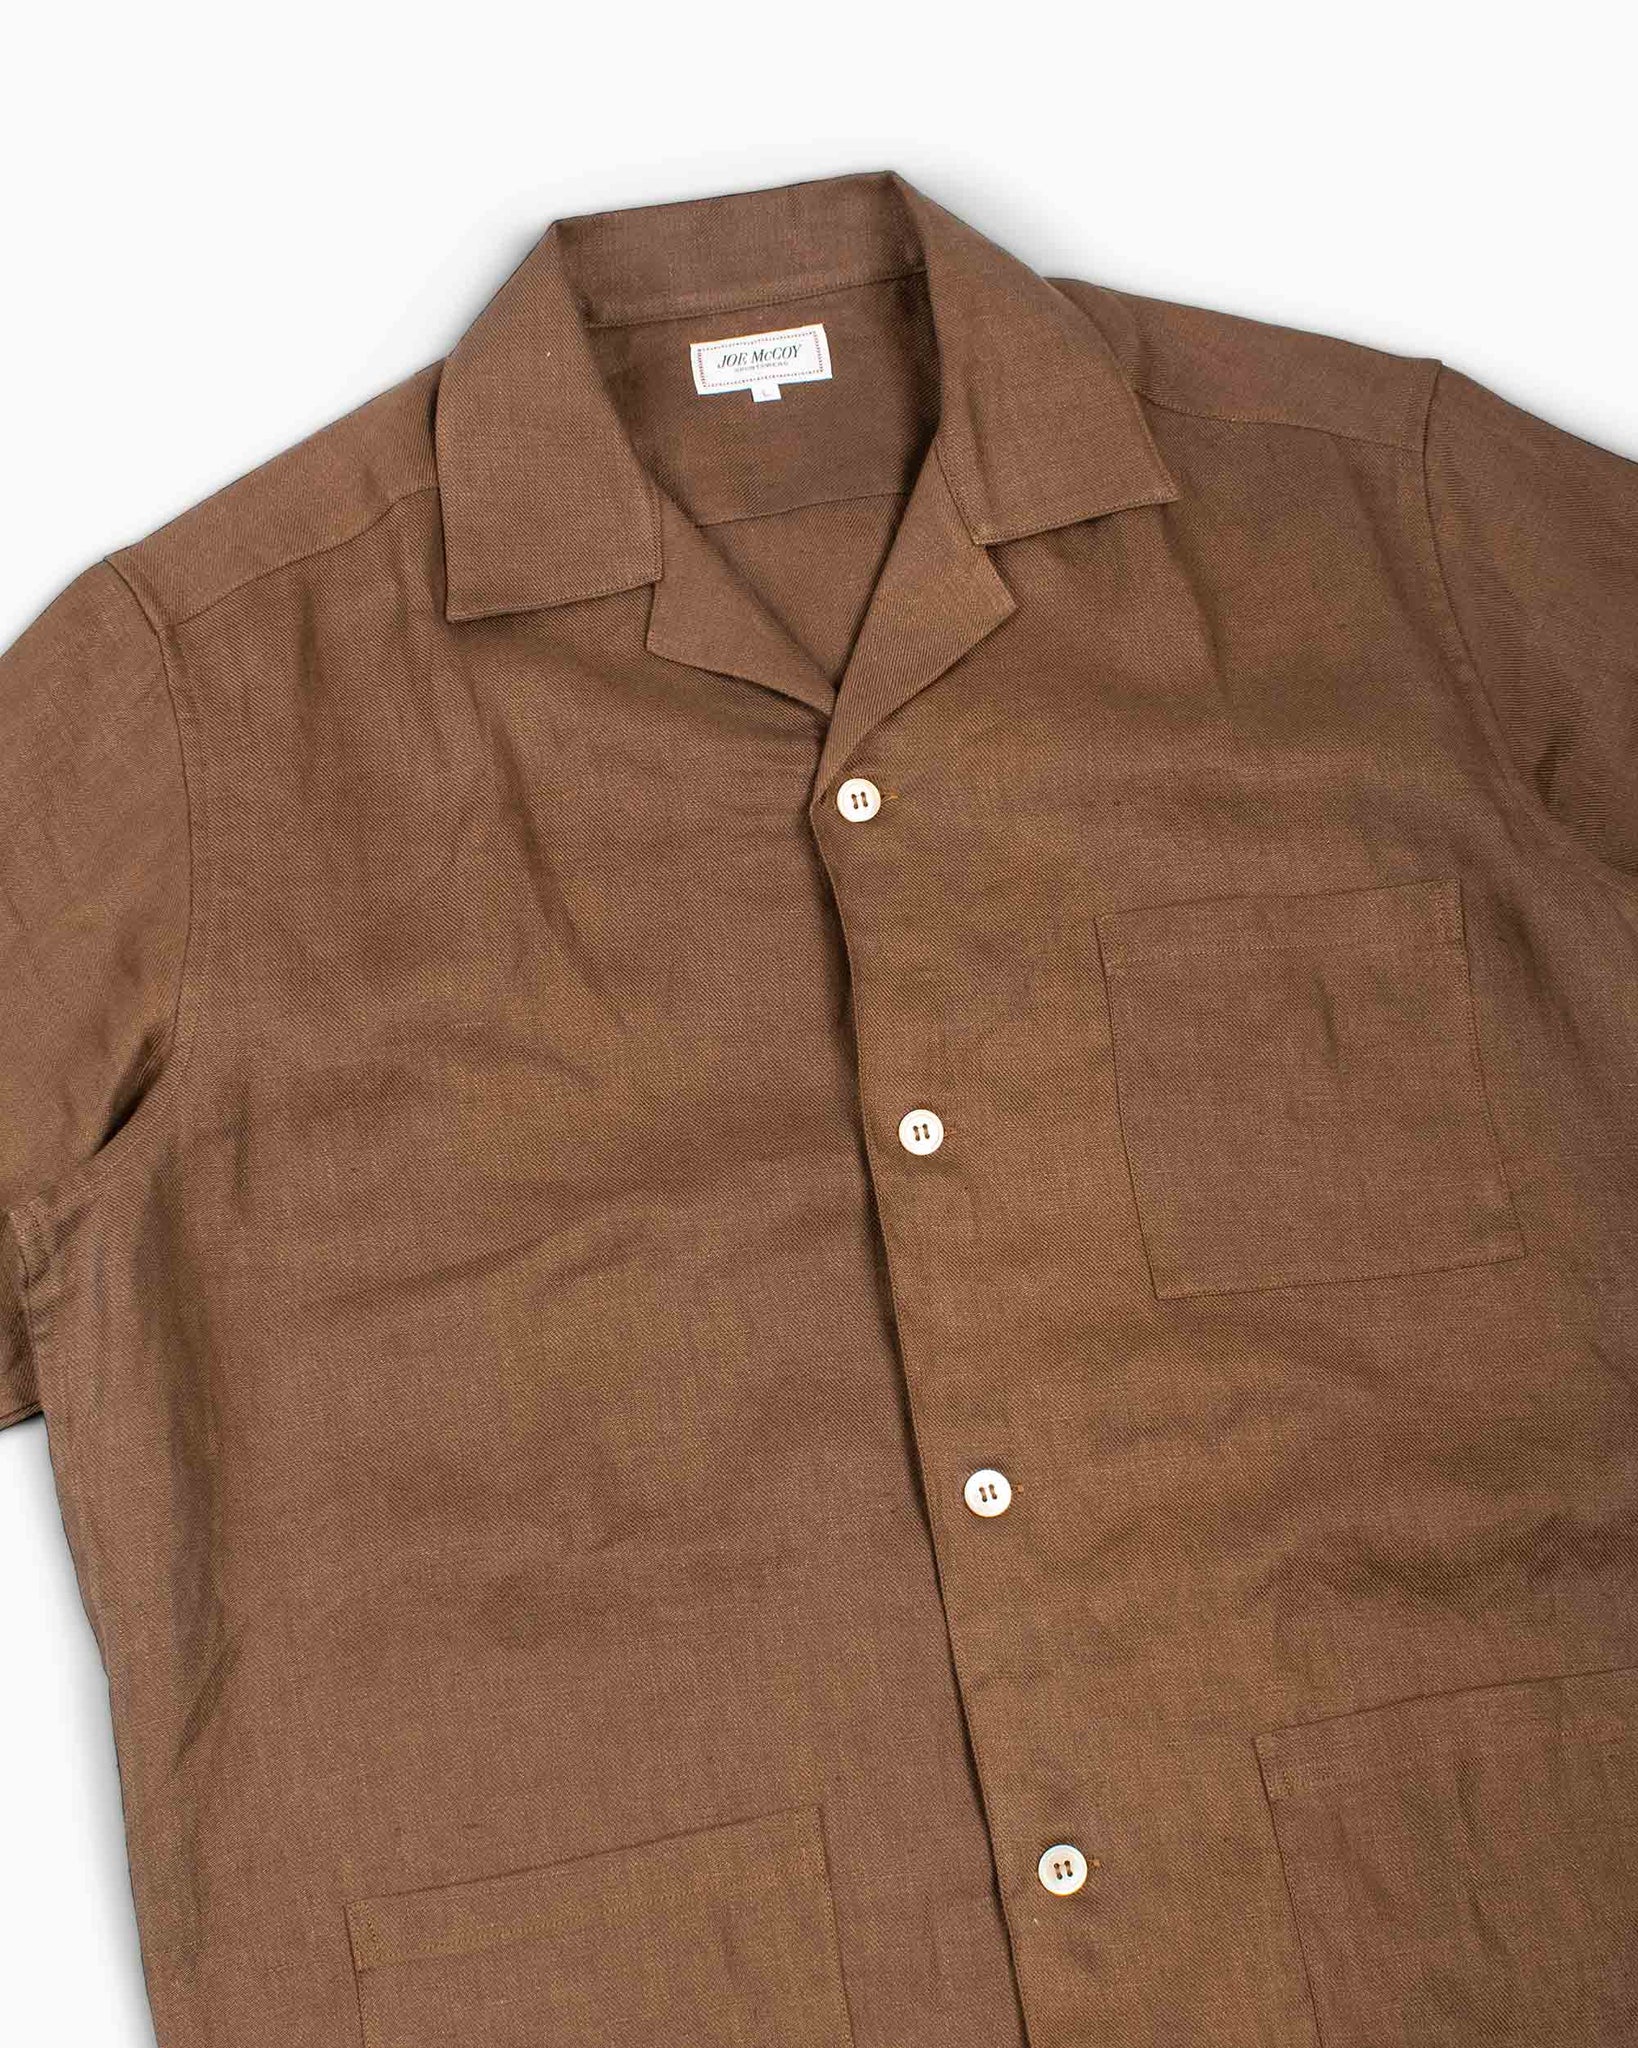 The Real McCoy's MS22010 Linen Open Collar Shirt Brown Details